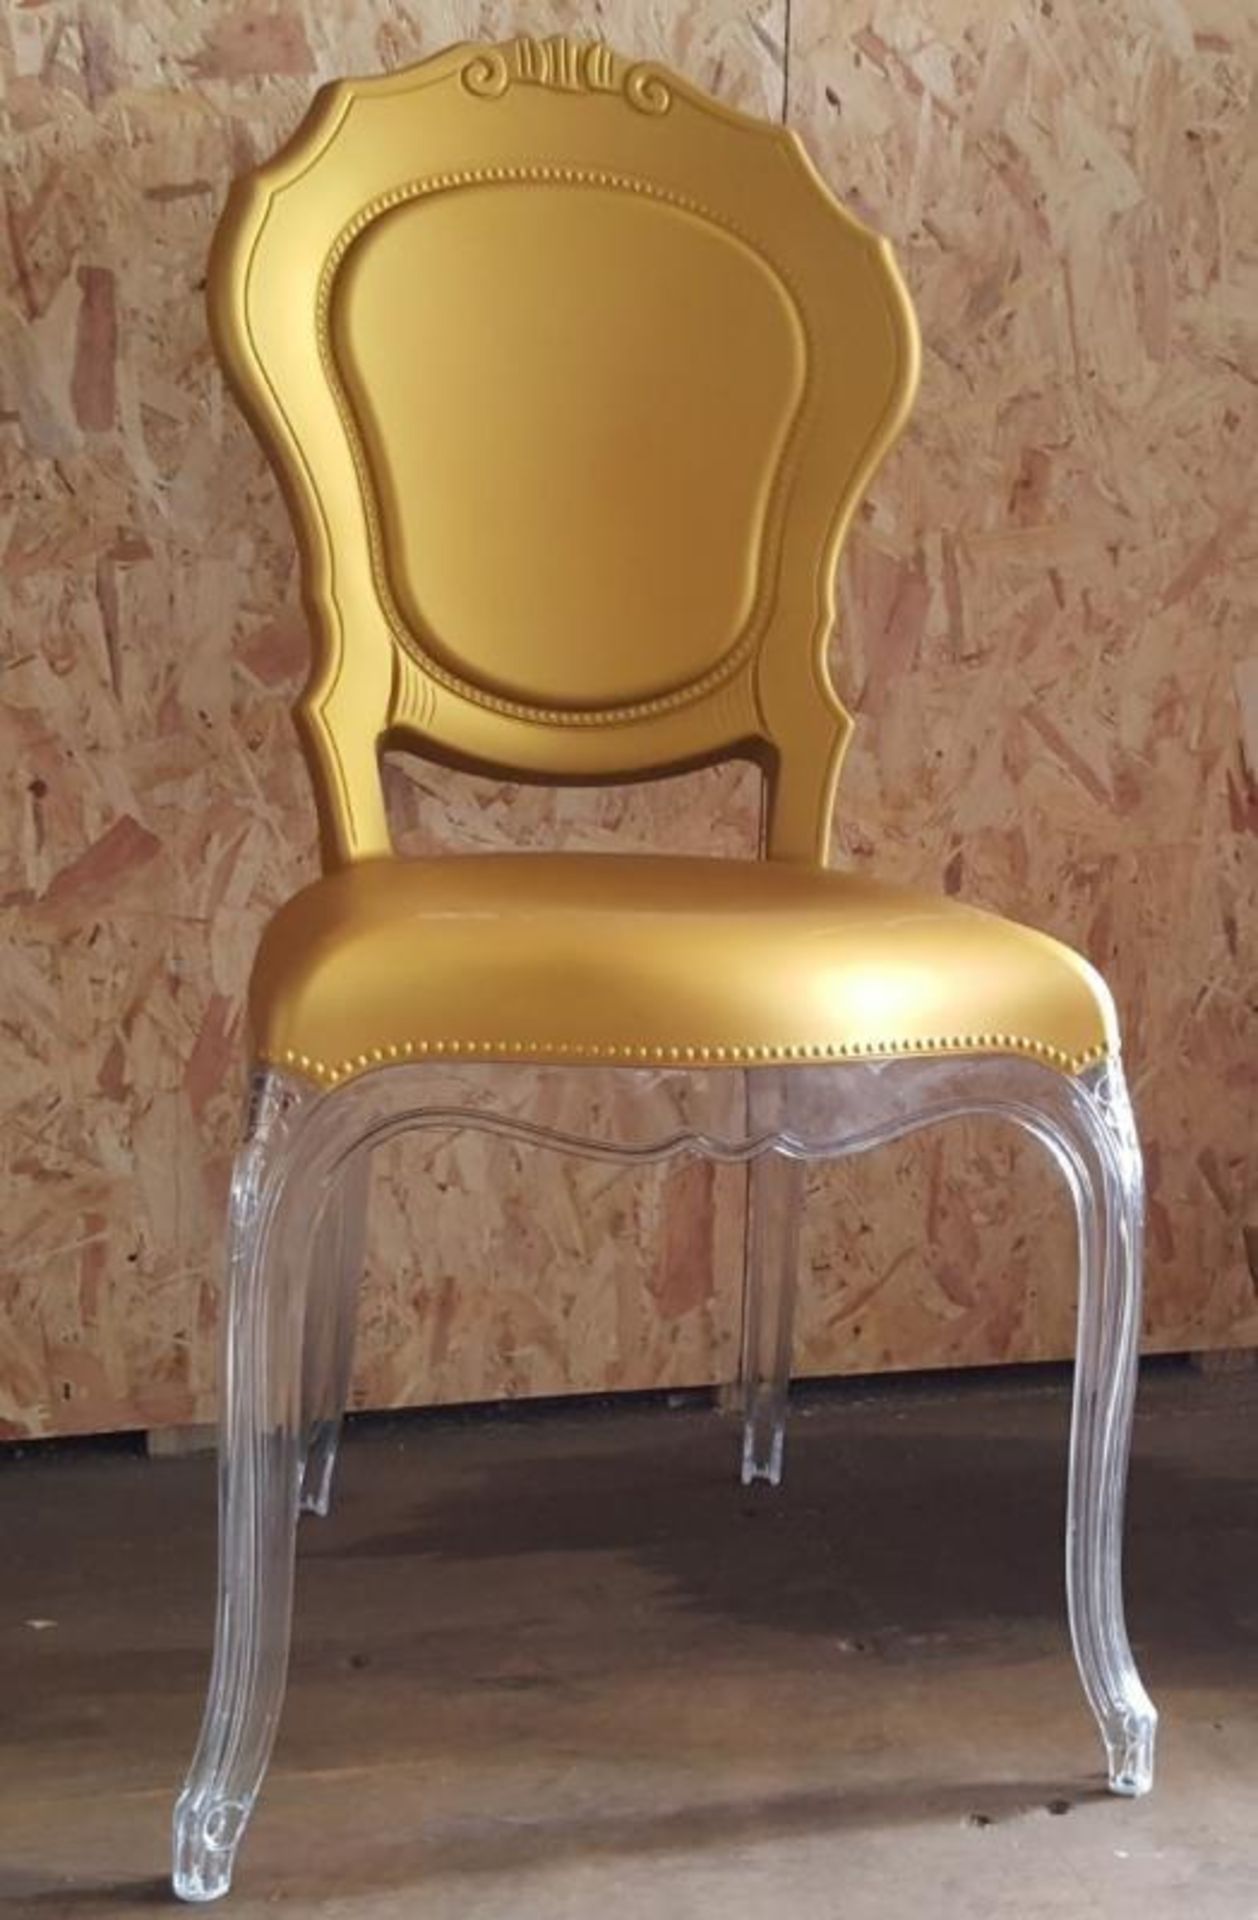 1 x Acrylic Baroque-style 'Belle Epoque' Chair Featuring A Clear Polycarbonate Frame With An - Image 3 of 4